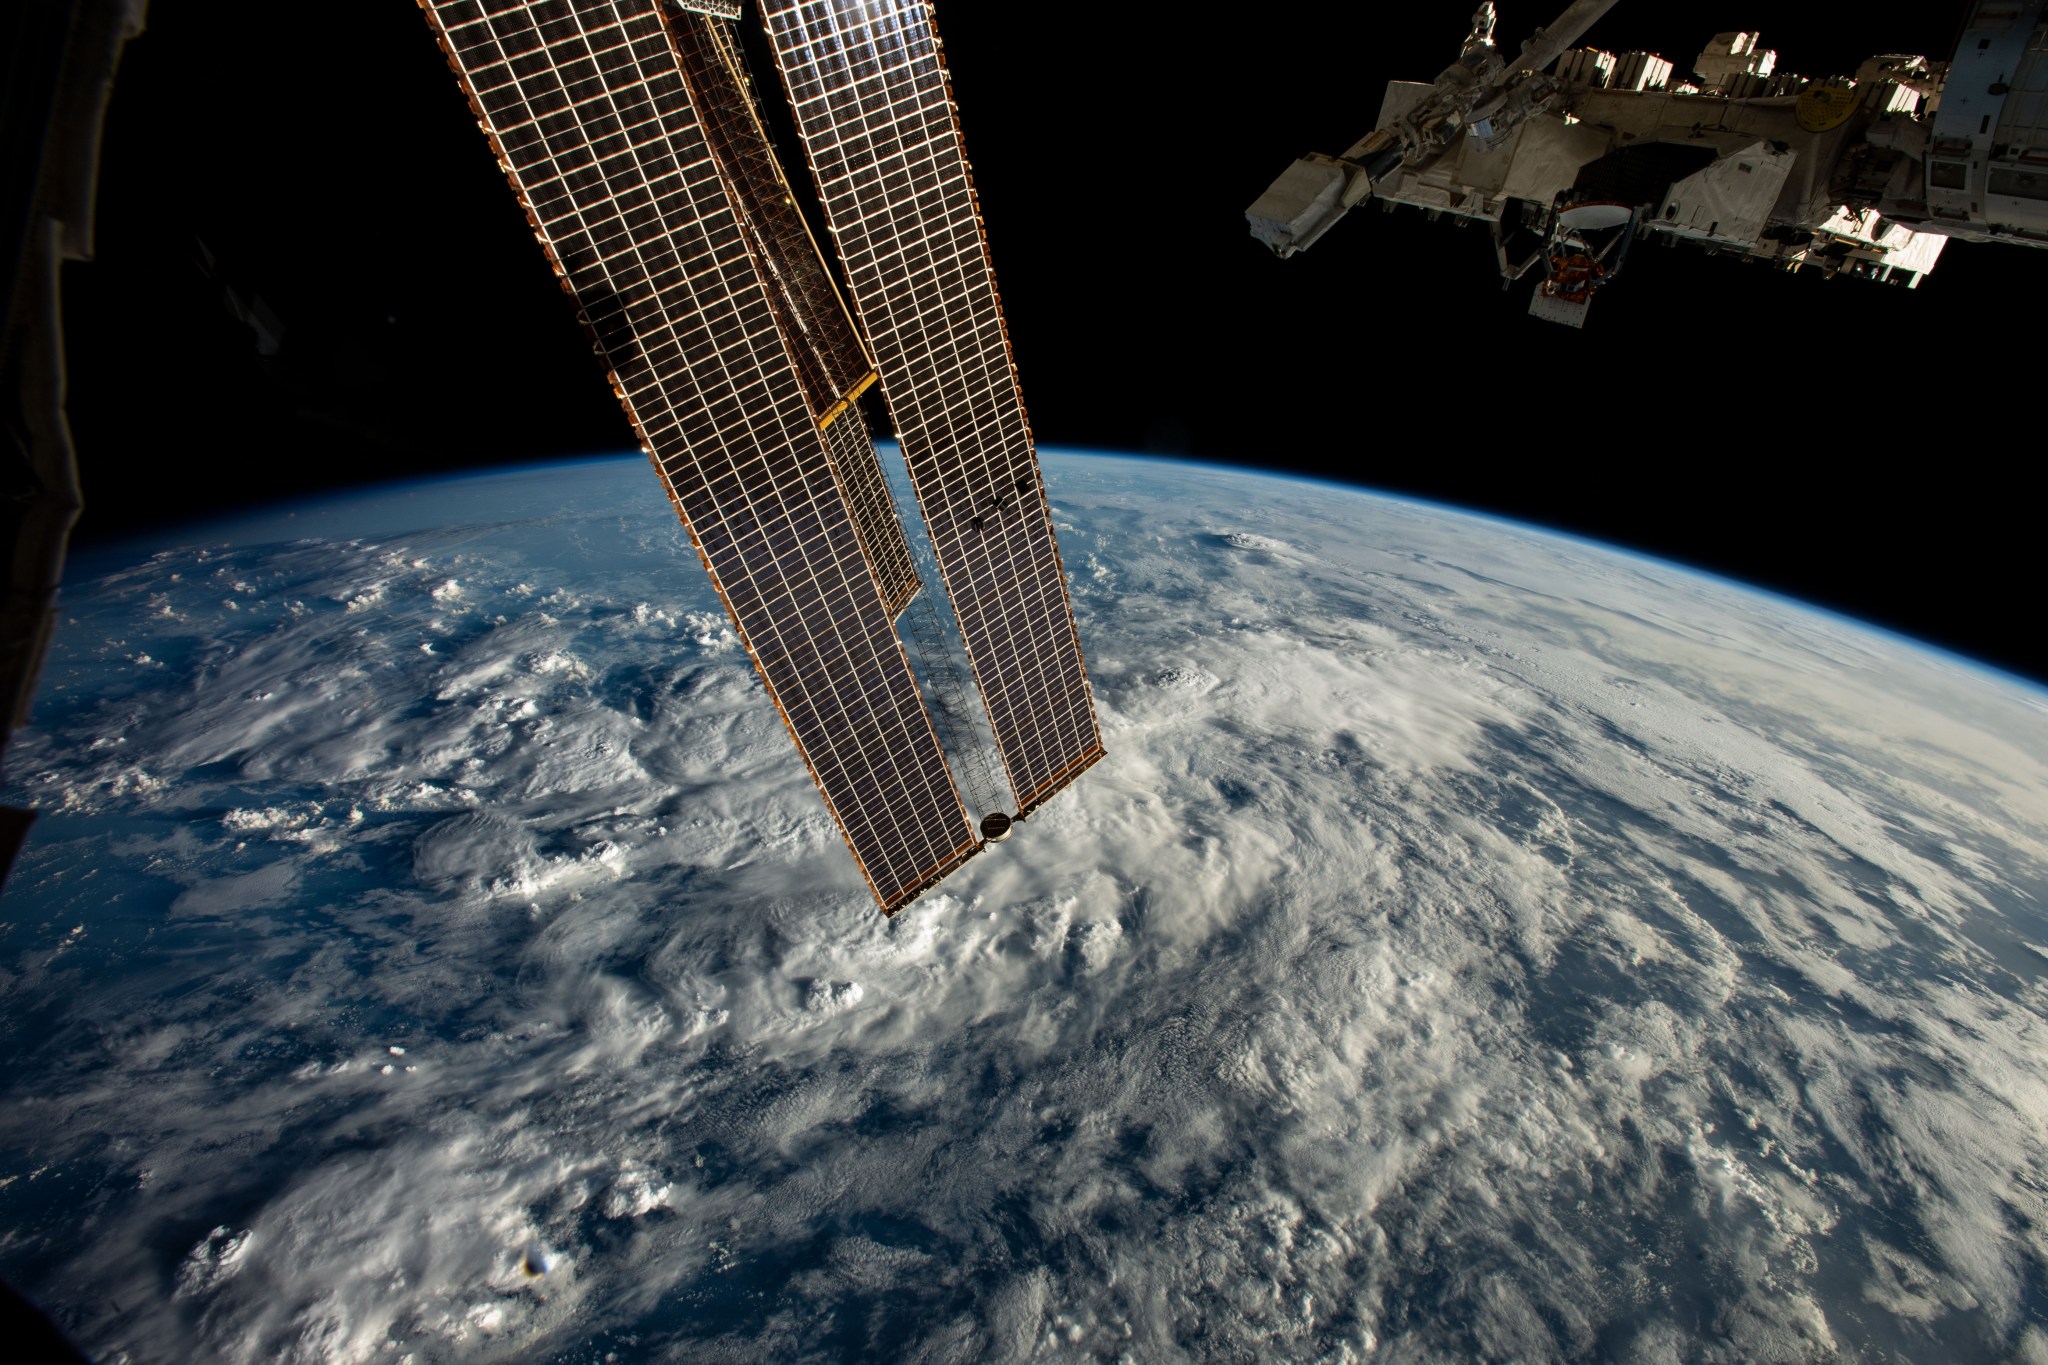 image of Earth, small satellite deployer and station solar panels